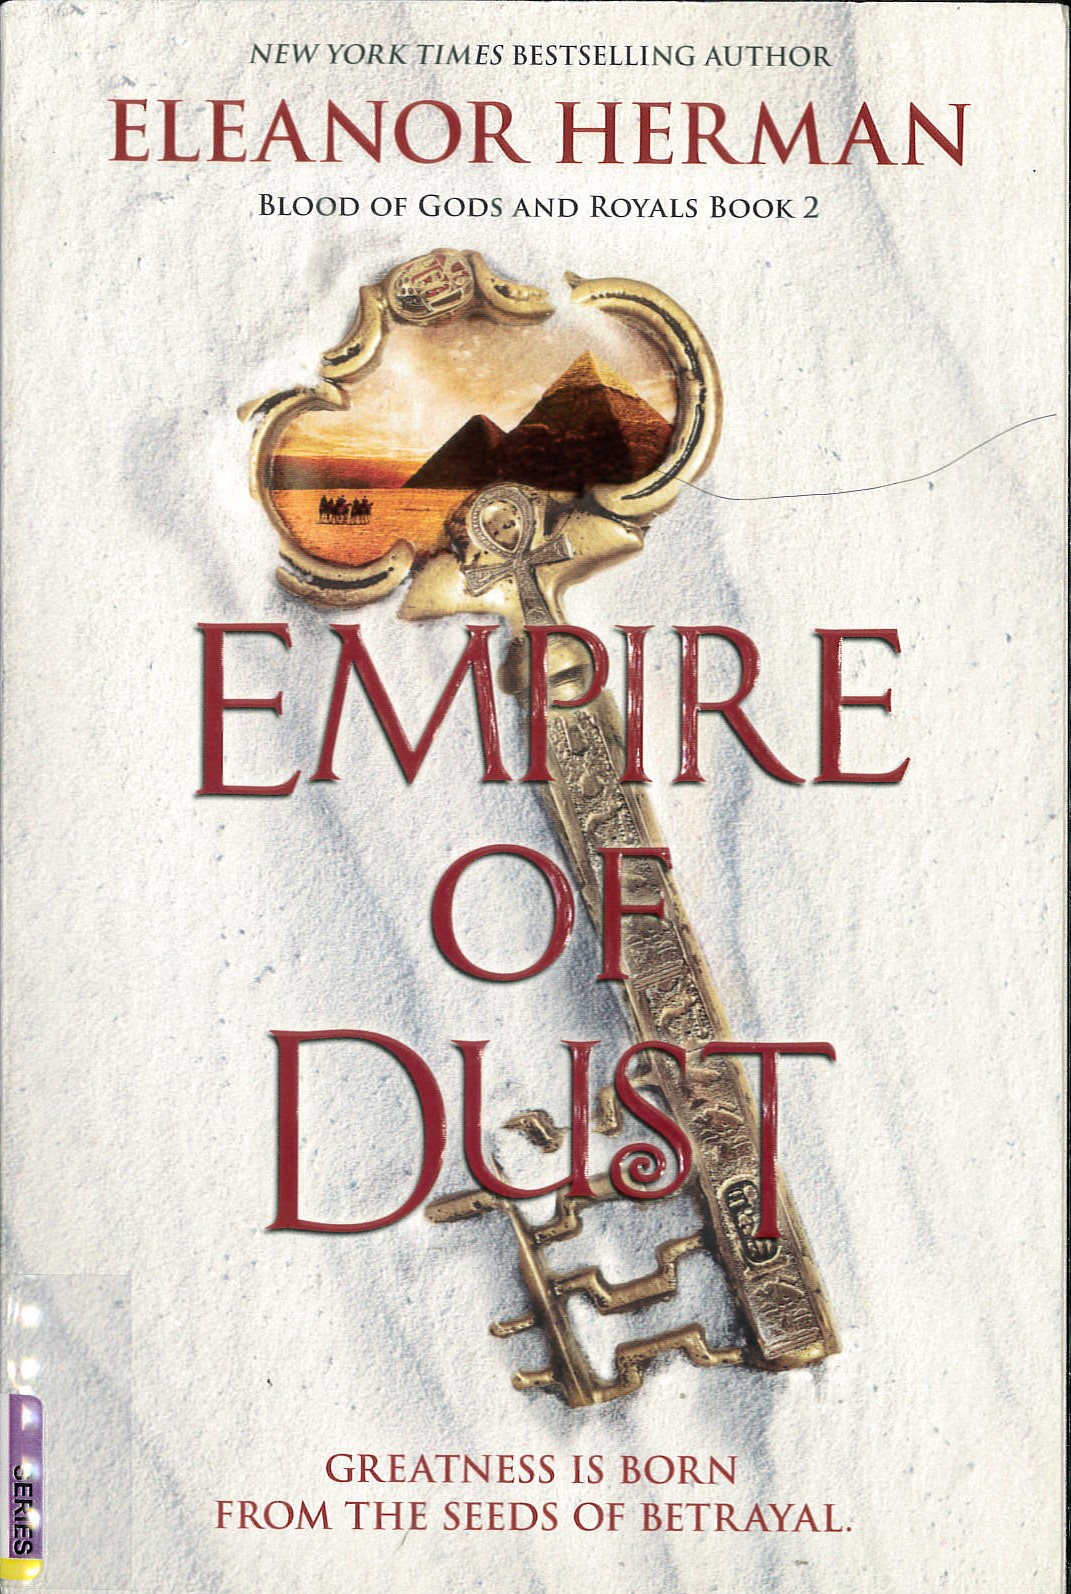 Empire of dust /